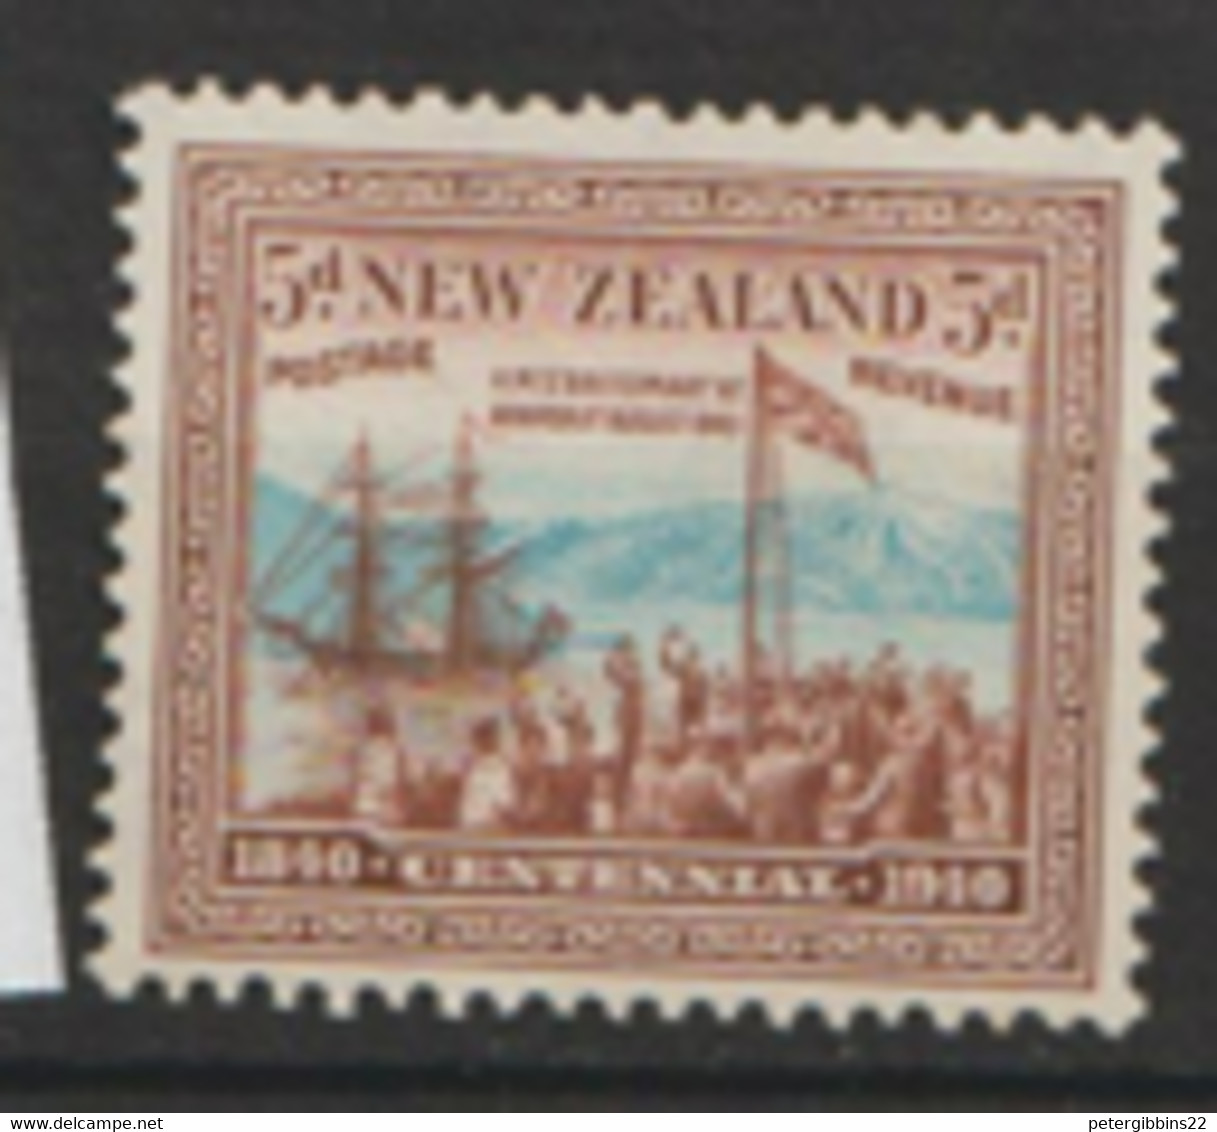 New Zealand  1940   SG 620  5d Centennial  Lightly Mounted Mimt - Unused Stamps